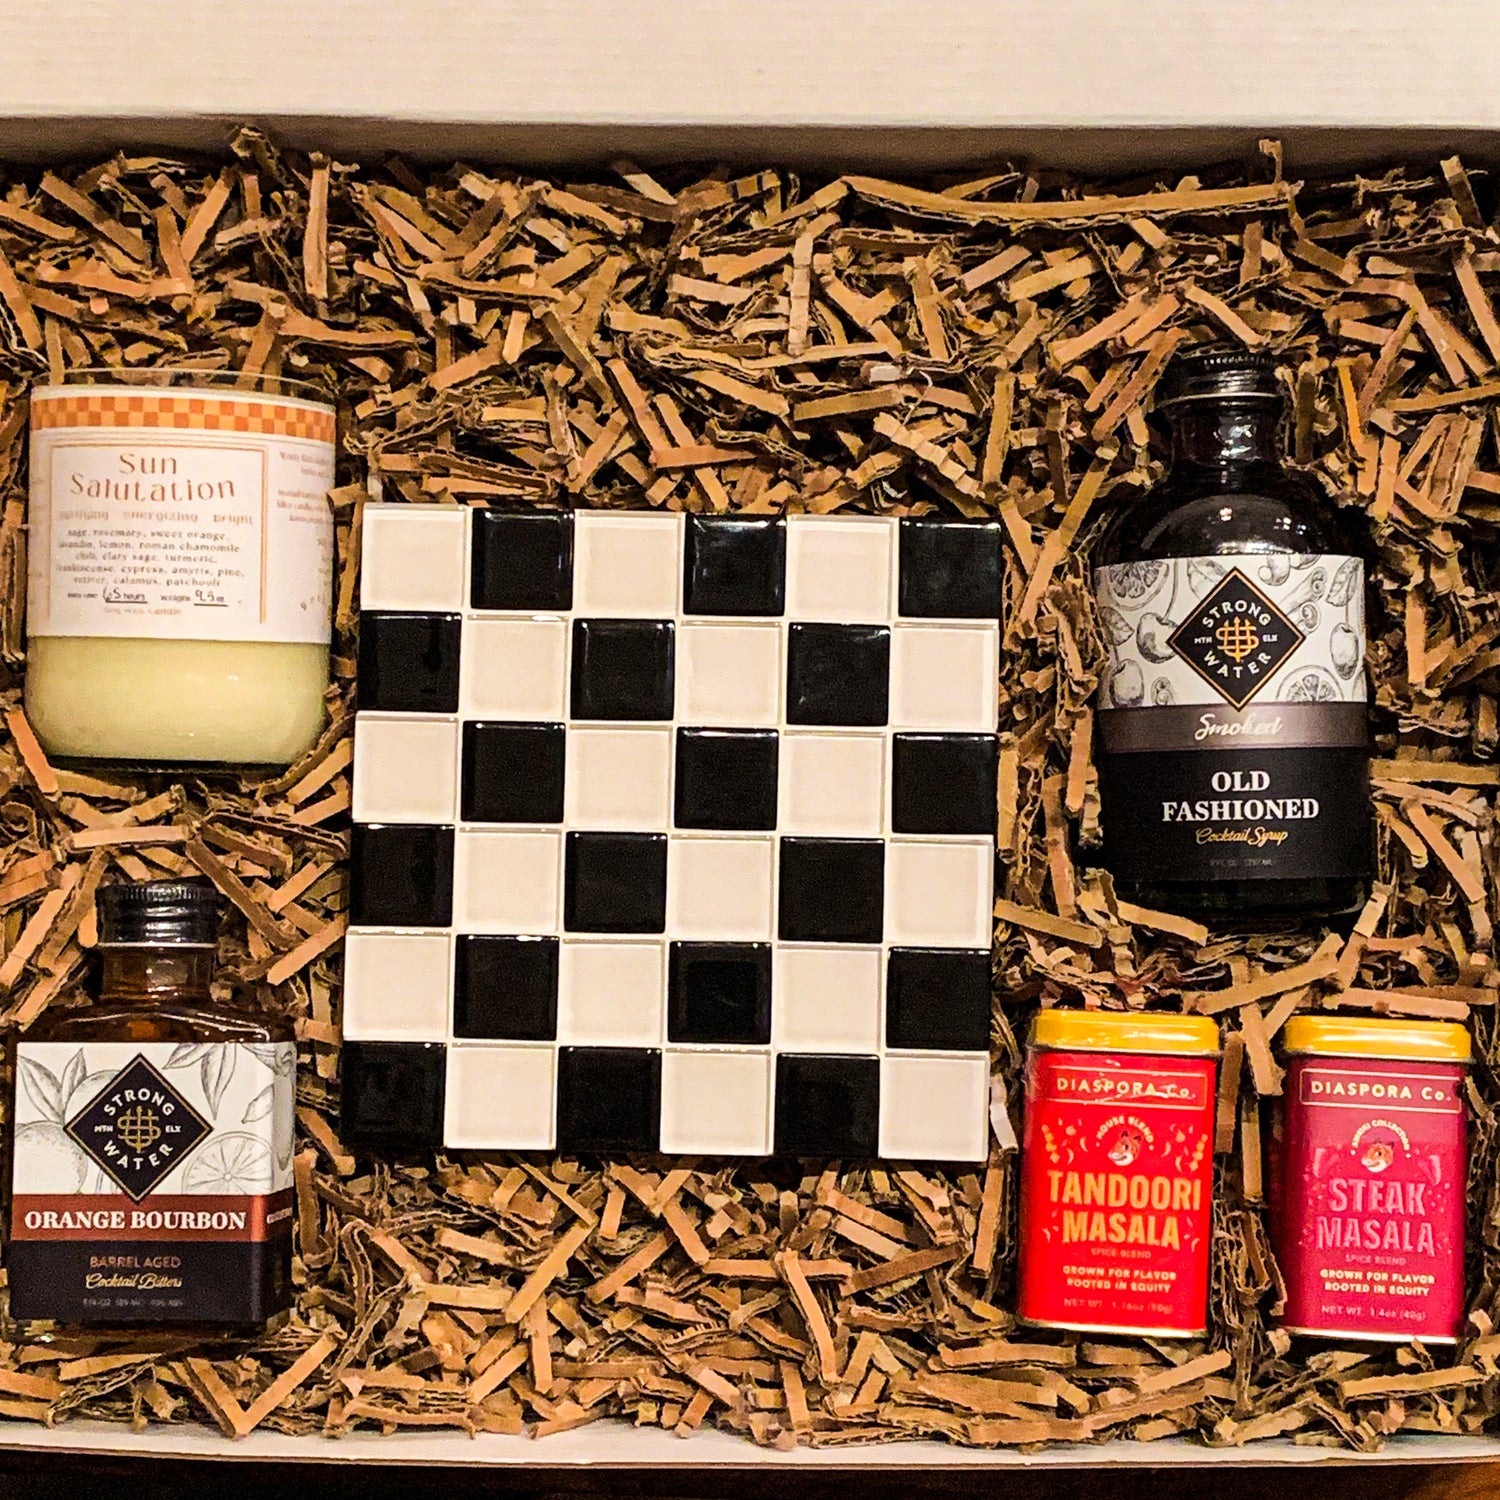 "Culinary Classics" housewarming gift box with a "sun salutation" soy wax candle, a square checkered trivet, smoked old fashioned syrup, orange bourbon bitters, and Diaspora Co.'s Tandoori Masala and Steak Masalas